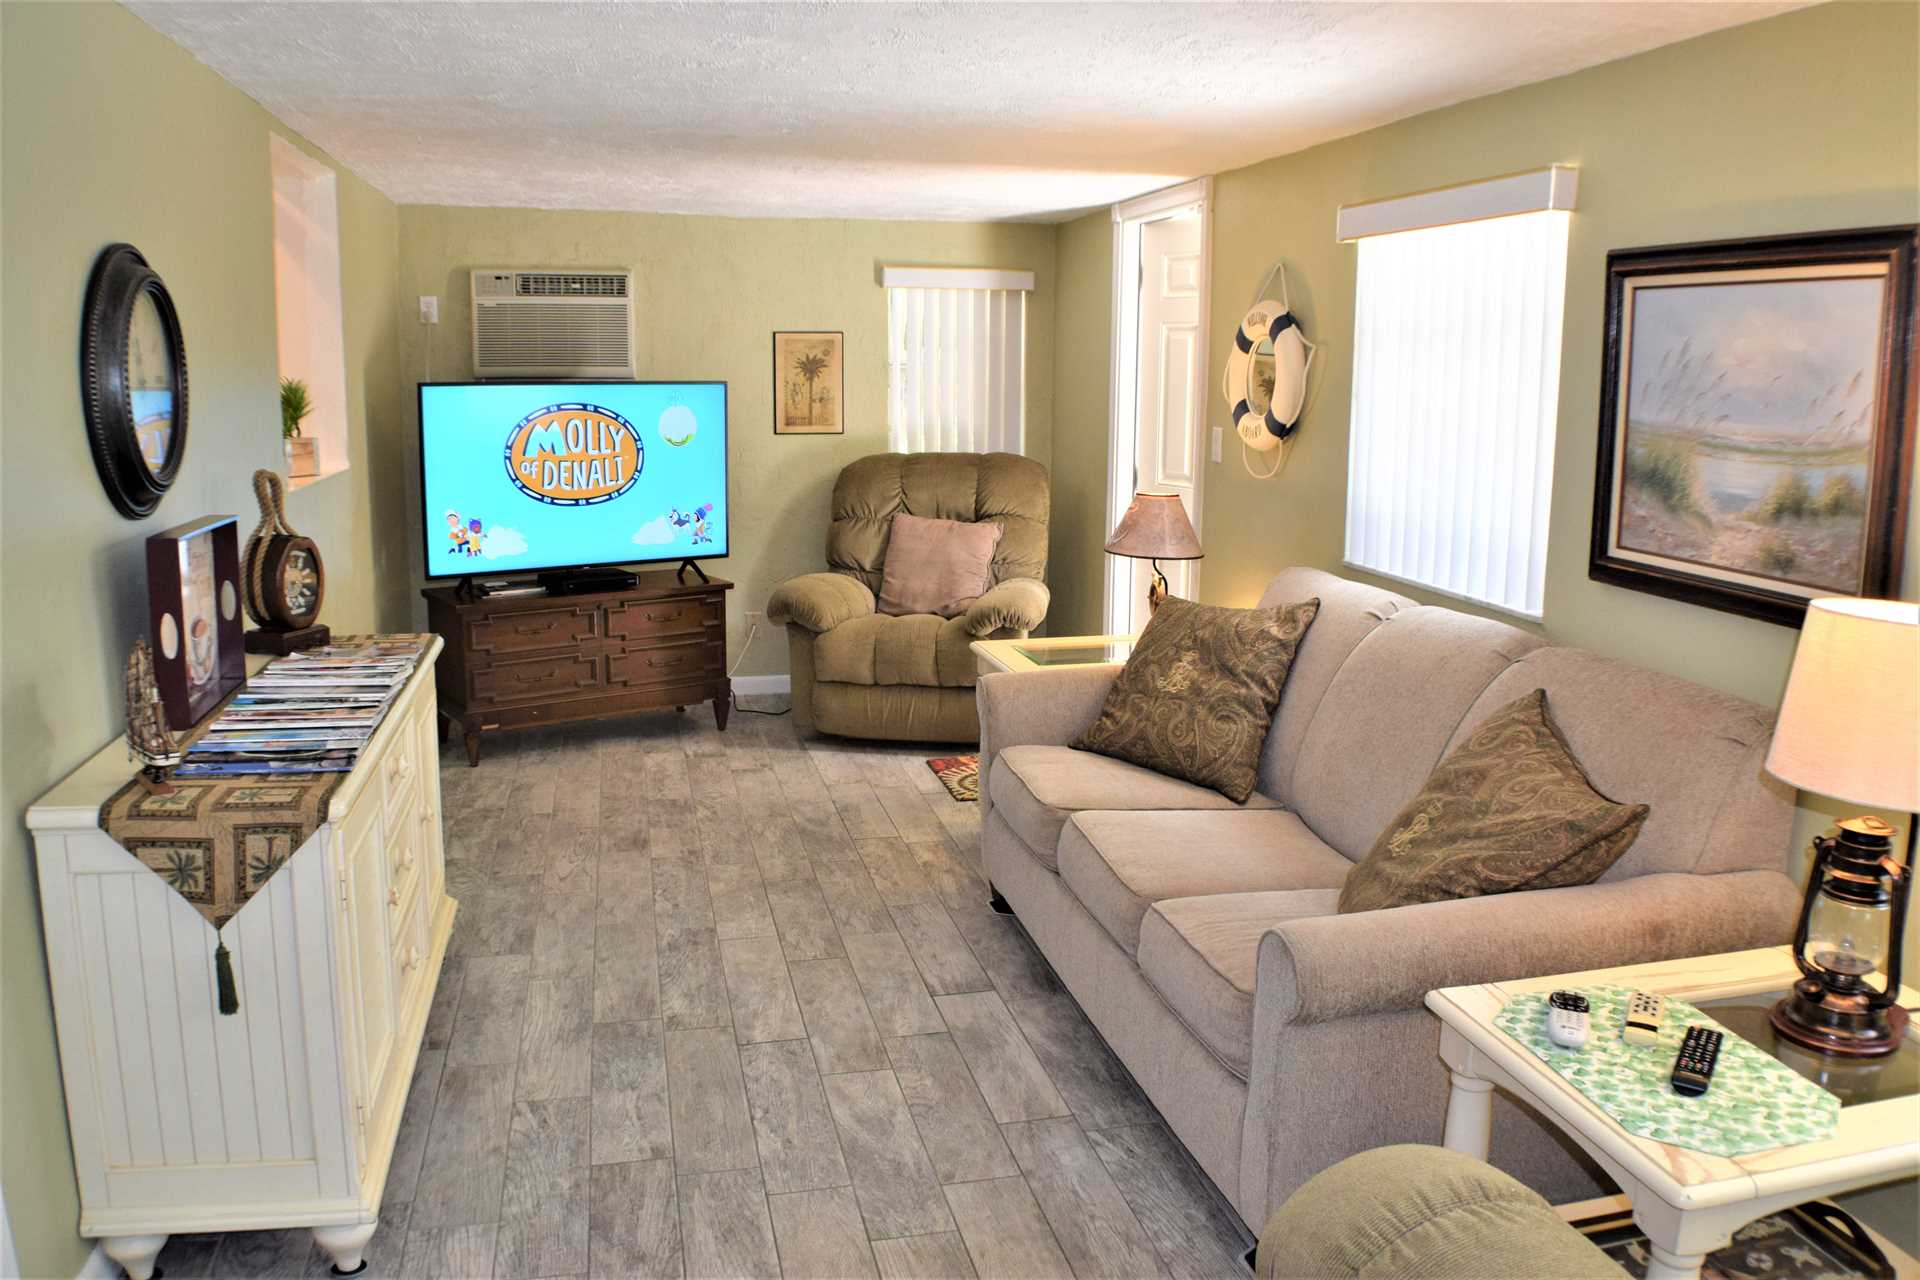 Florida room features HDTV and convertible sofabed.